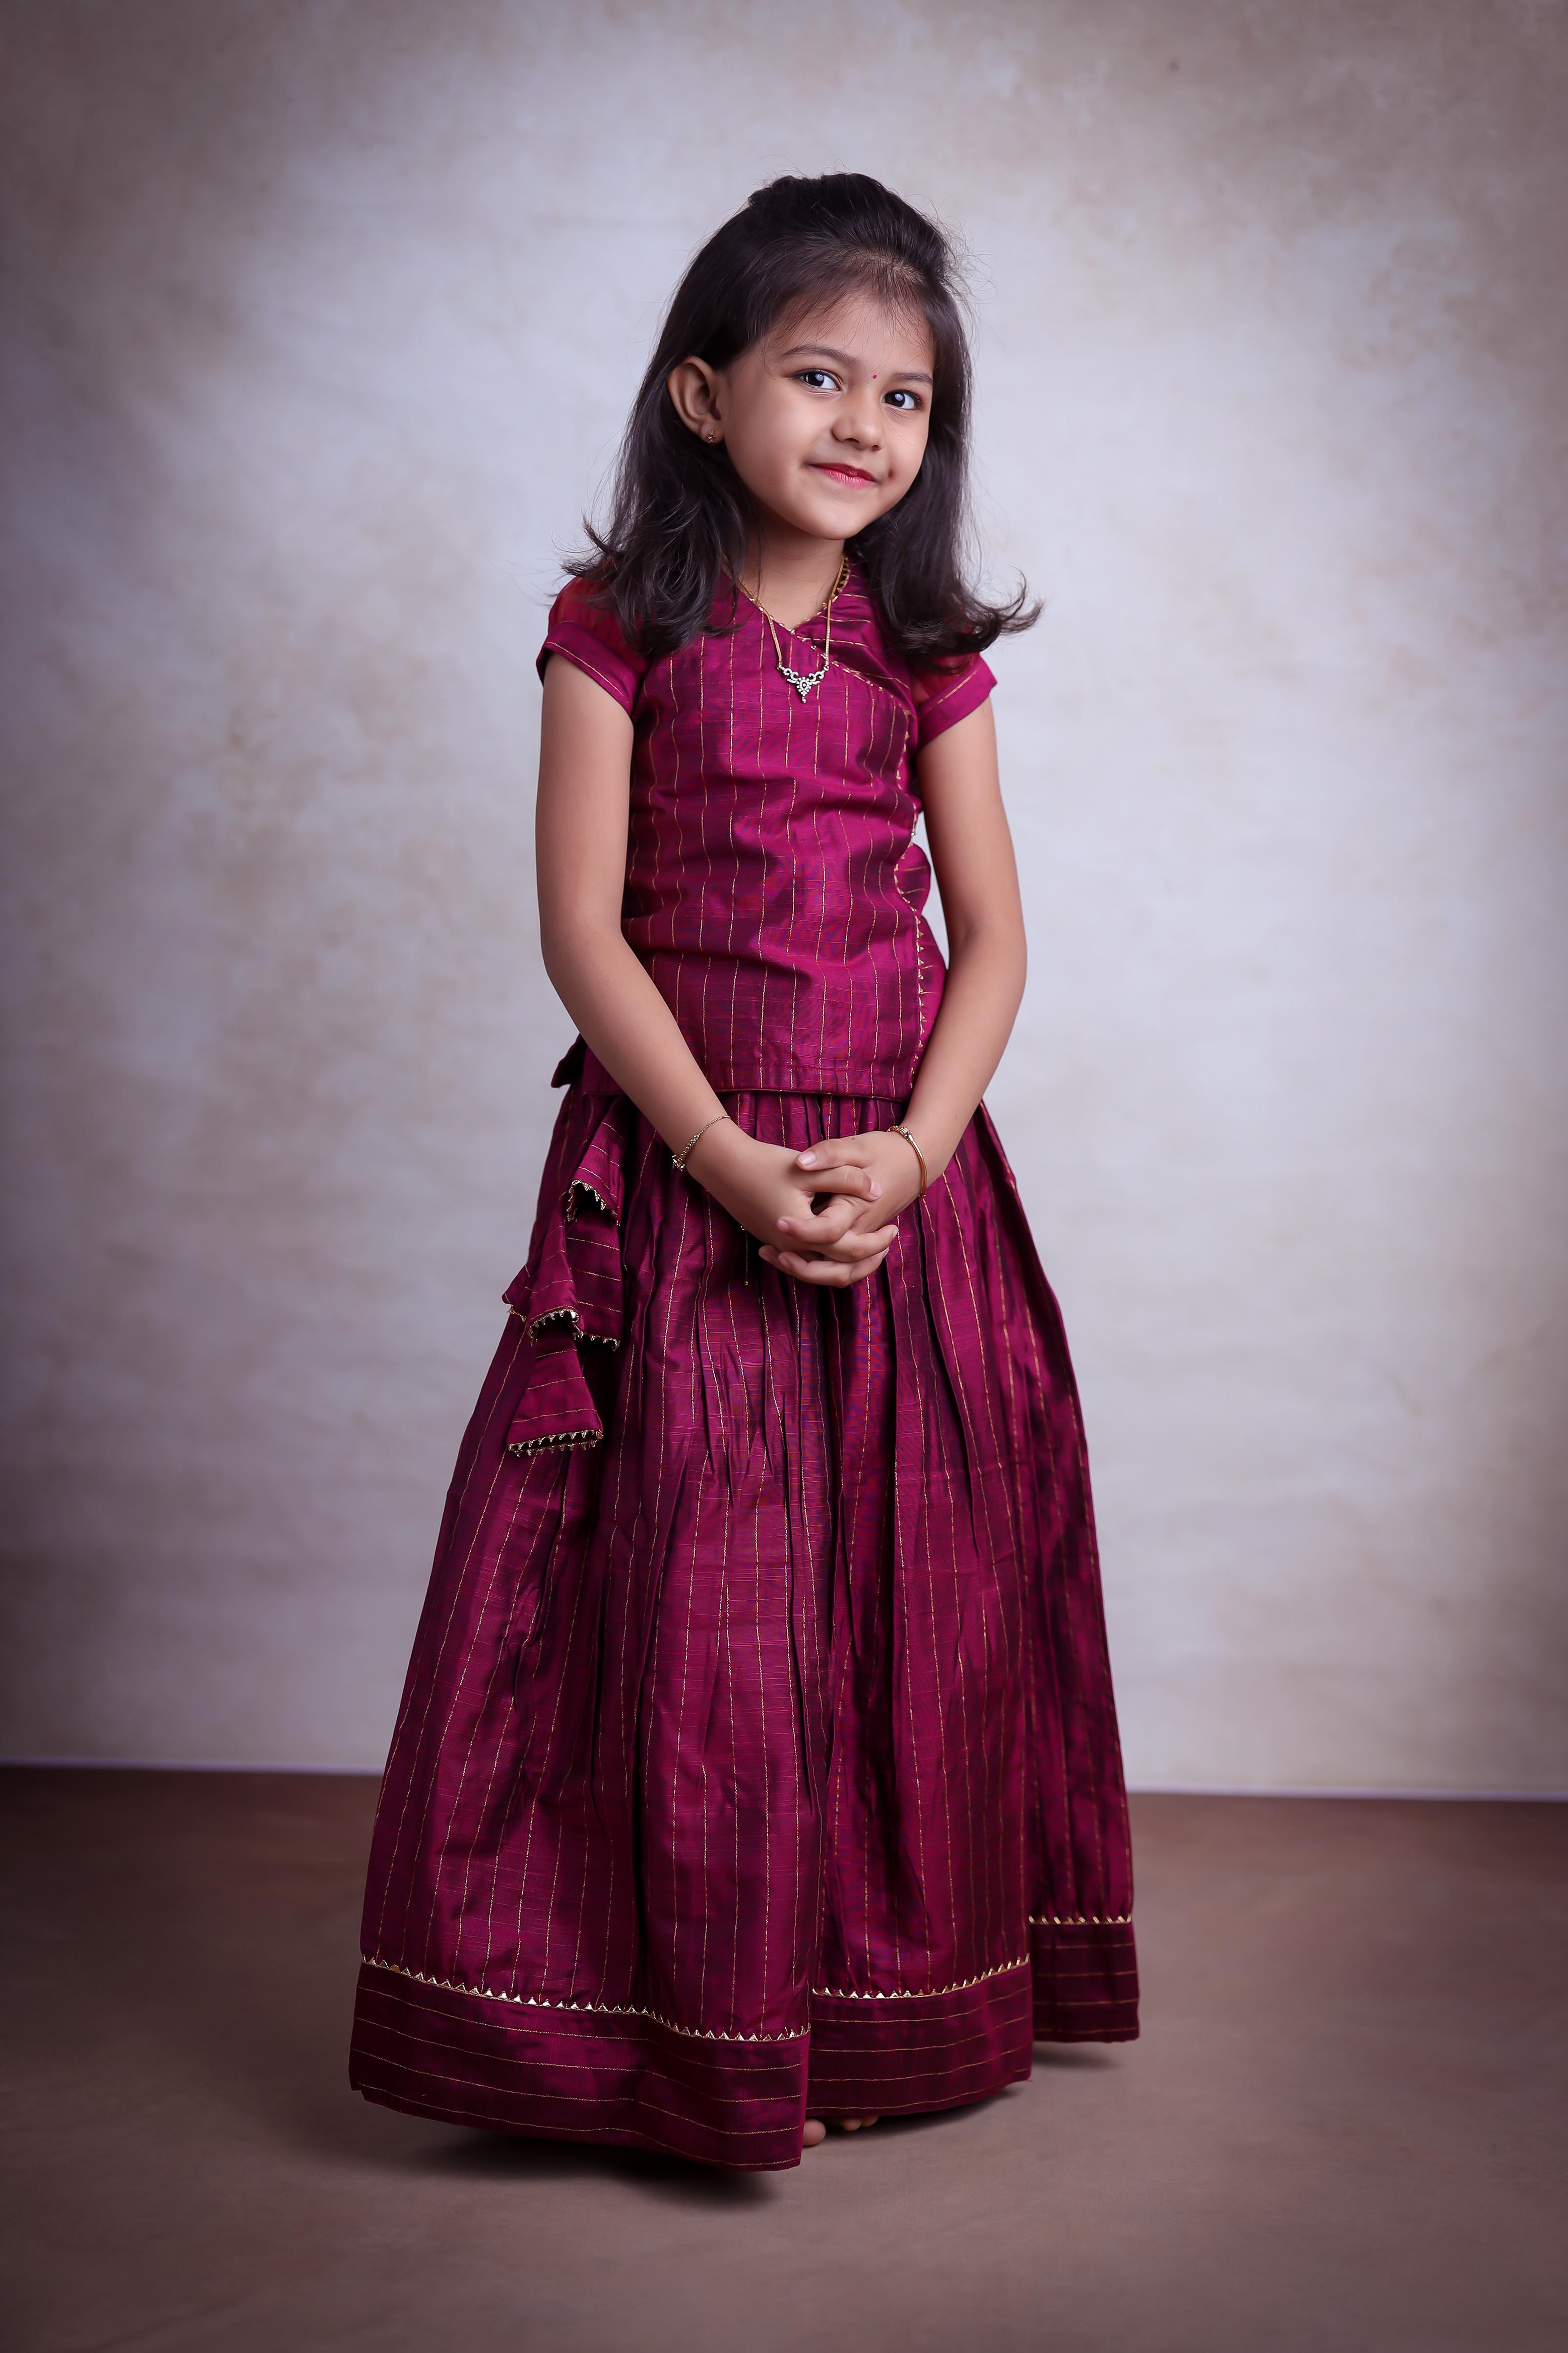 Shop for stunning new model pattu pavadai online. Choose from a variety of readymade pattu pavadai in silk cotton or pleated skirts with back zipper and organza puff sleeves.